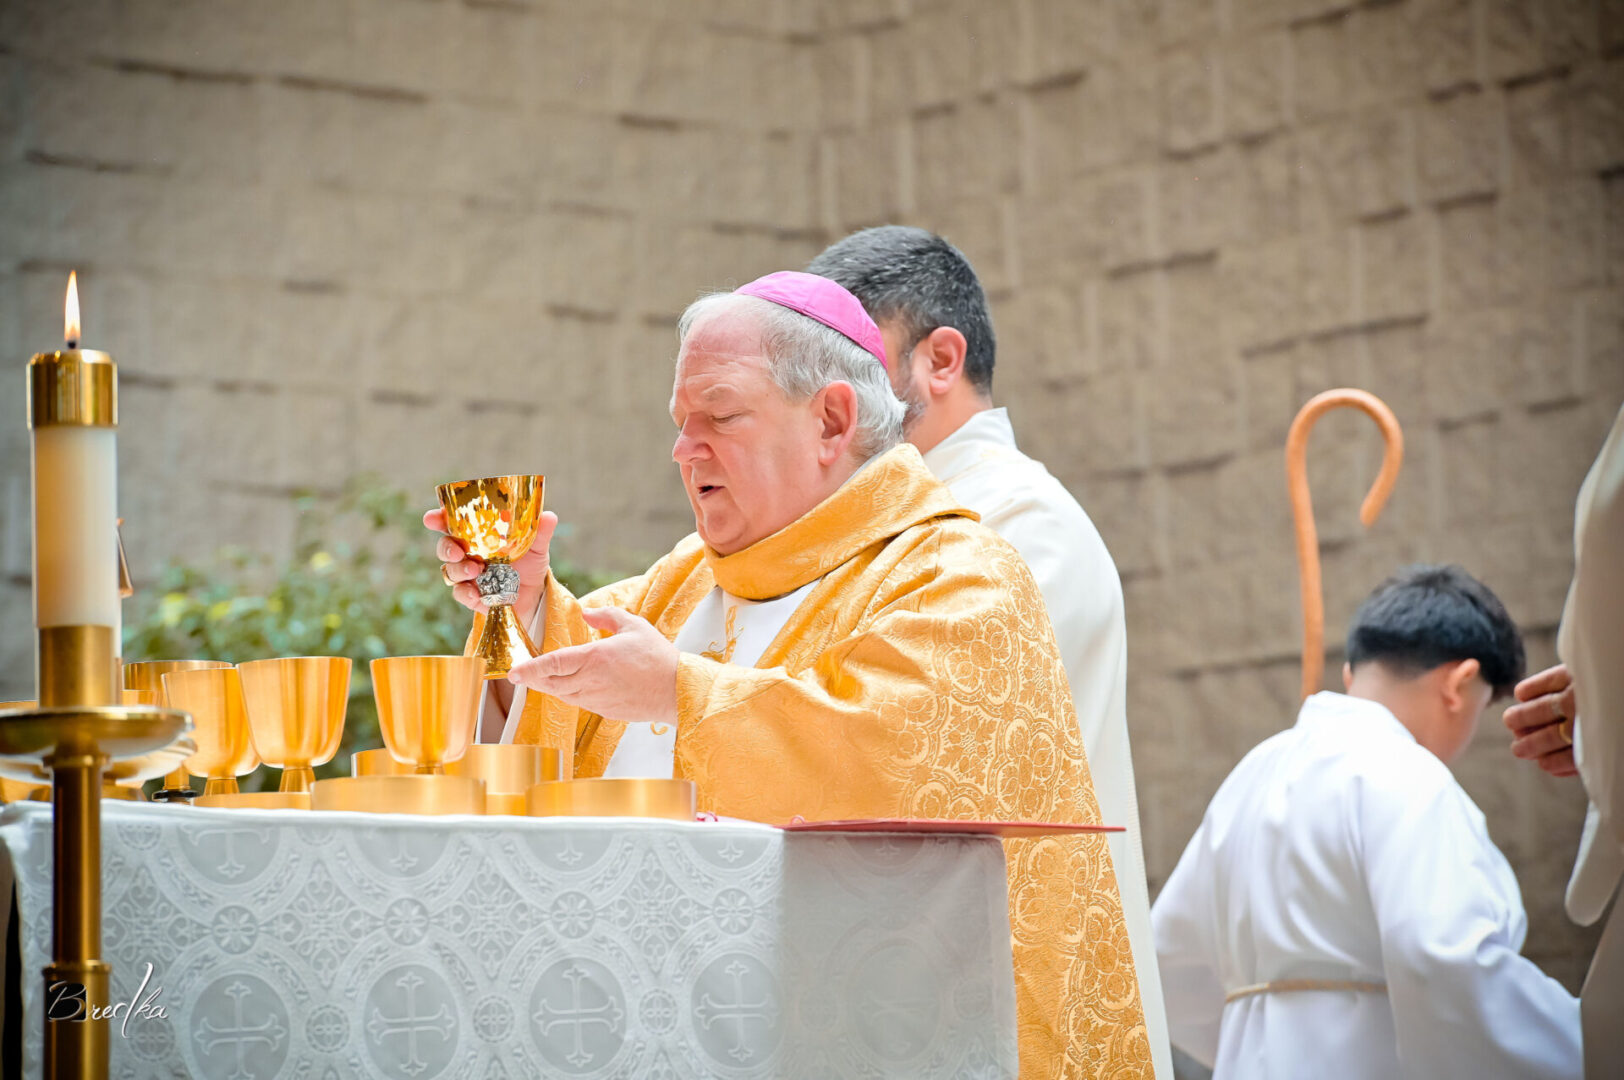 Bishop holding chalice during church service.